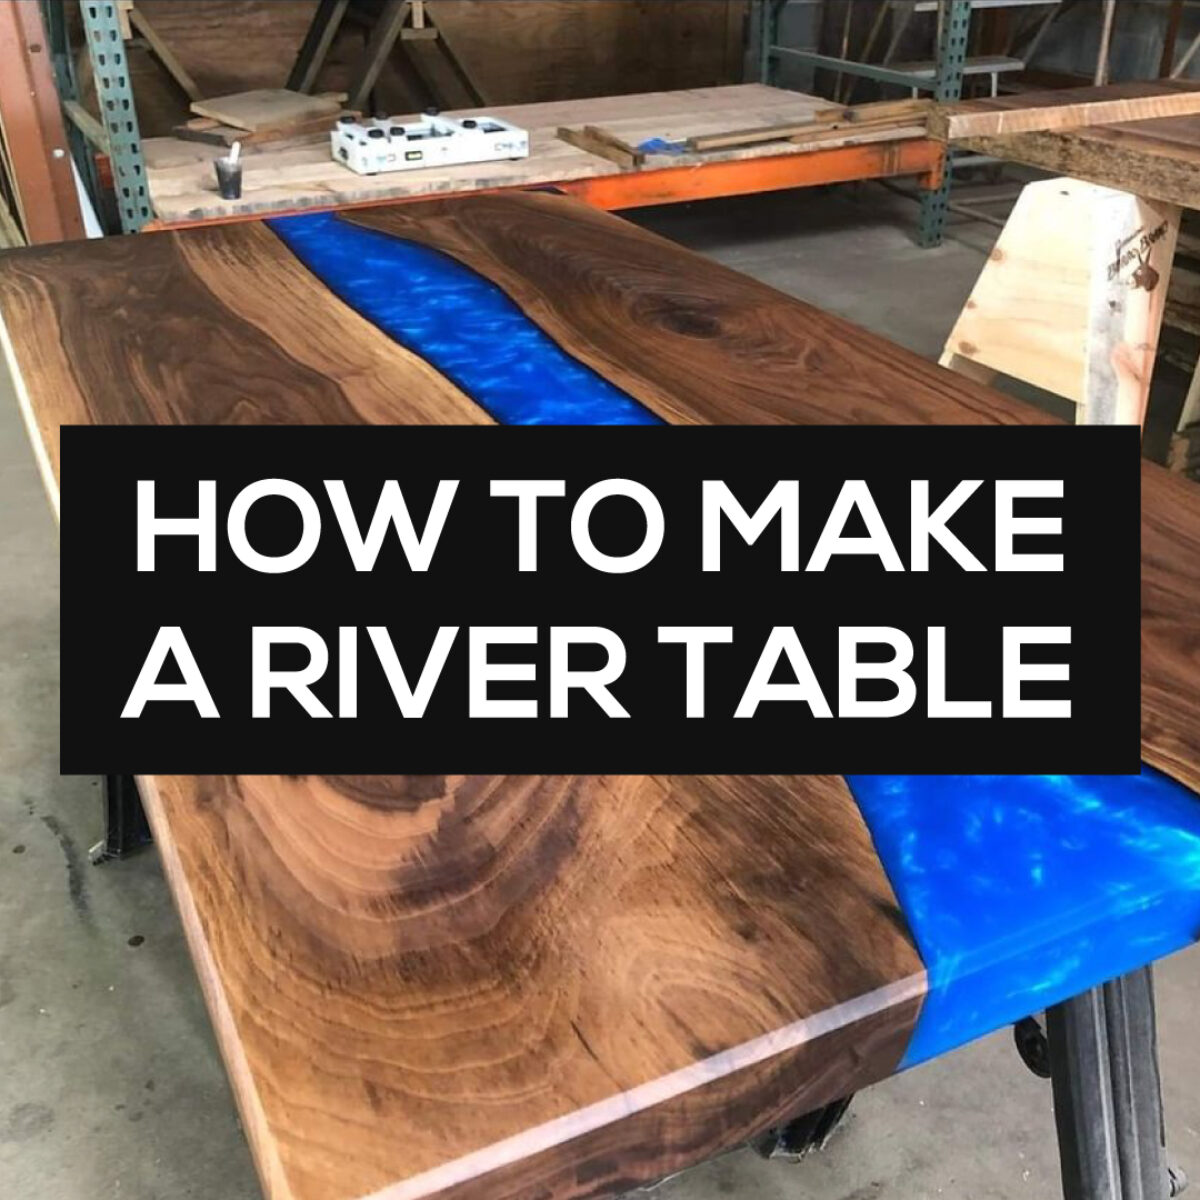 How to Measure, Mix, and Pour Table Top Epoxy 